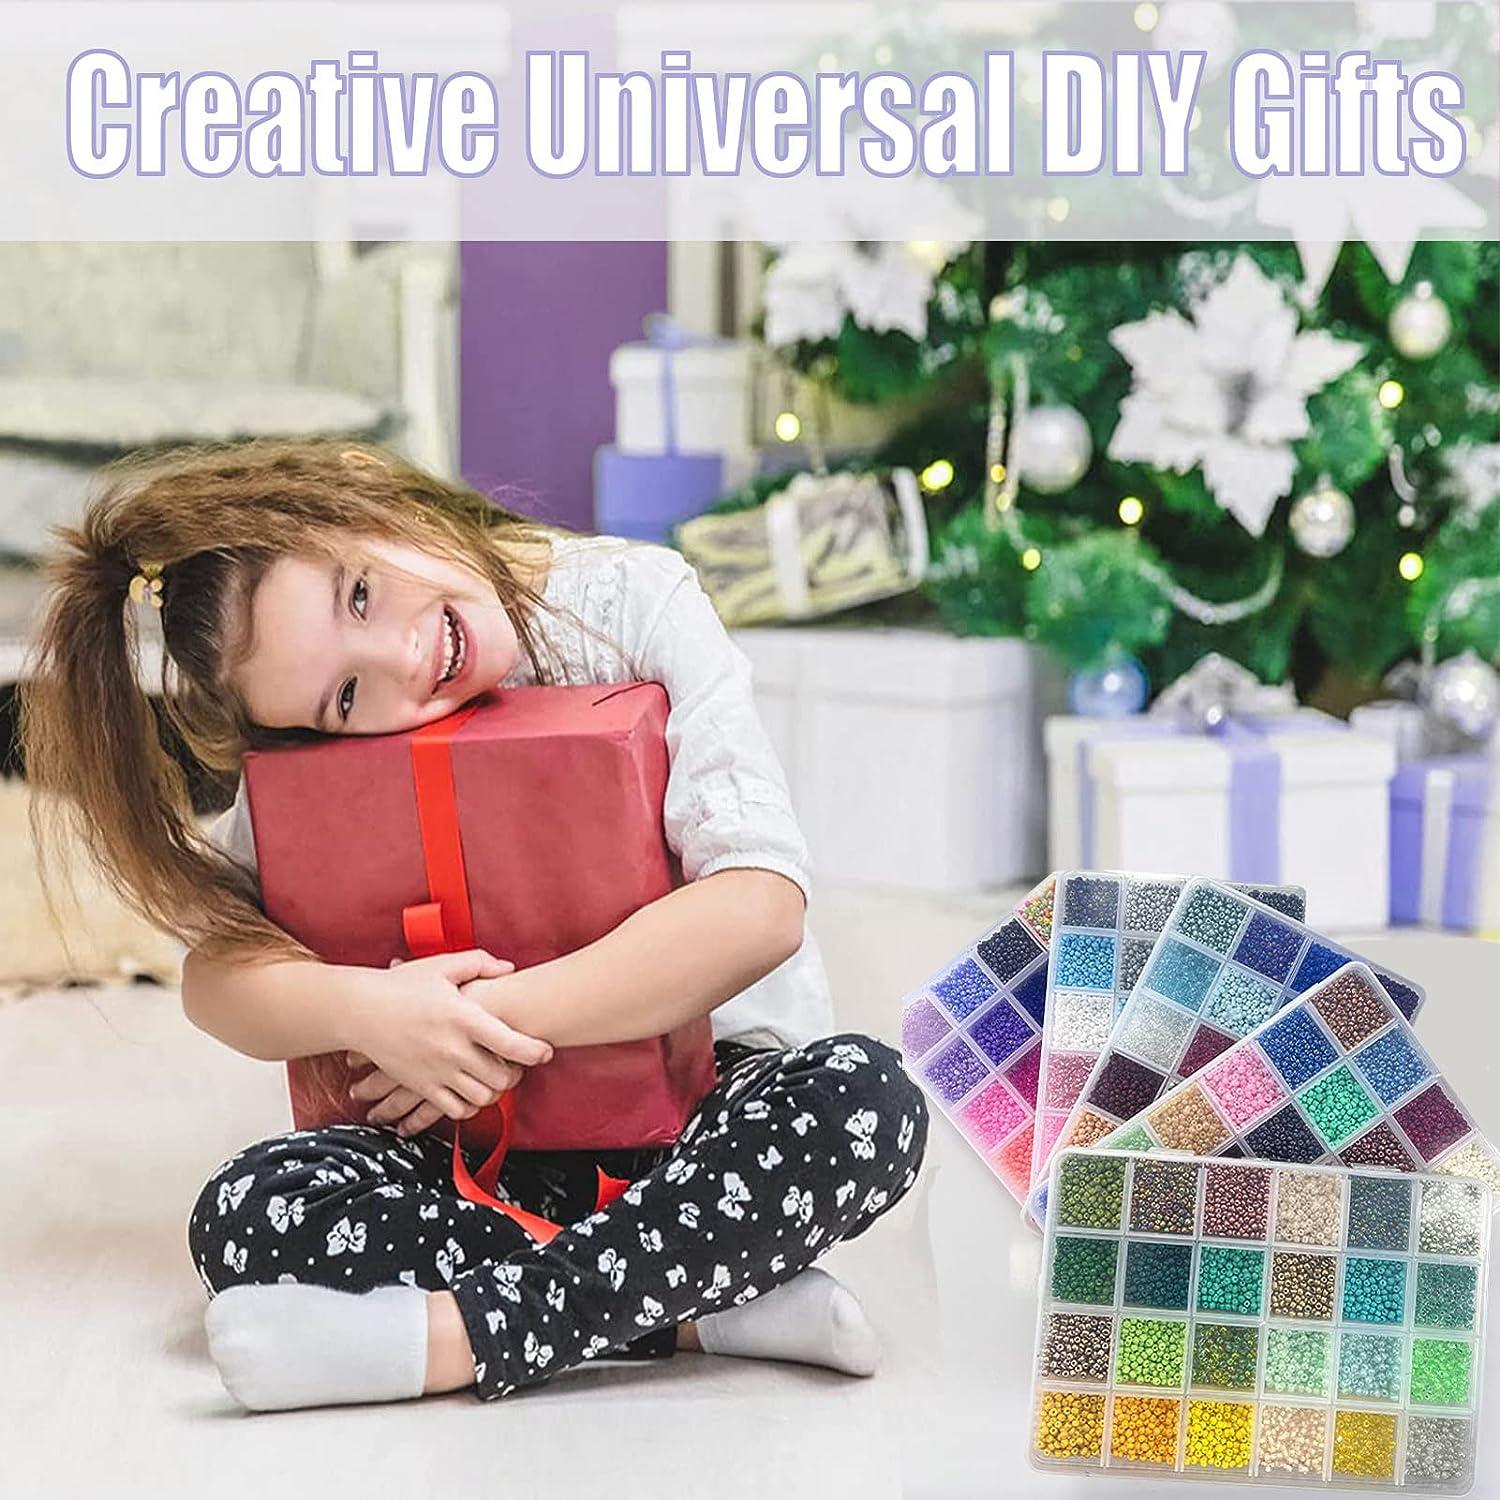 Unbox - Detailed Breakdown of All the Cool Things in this Box -QUEFE Clay  Beads Bracelet Making Kit! 